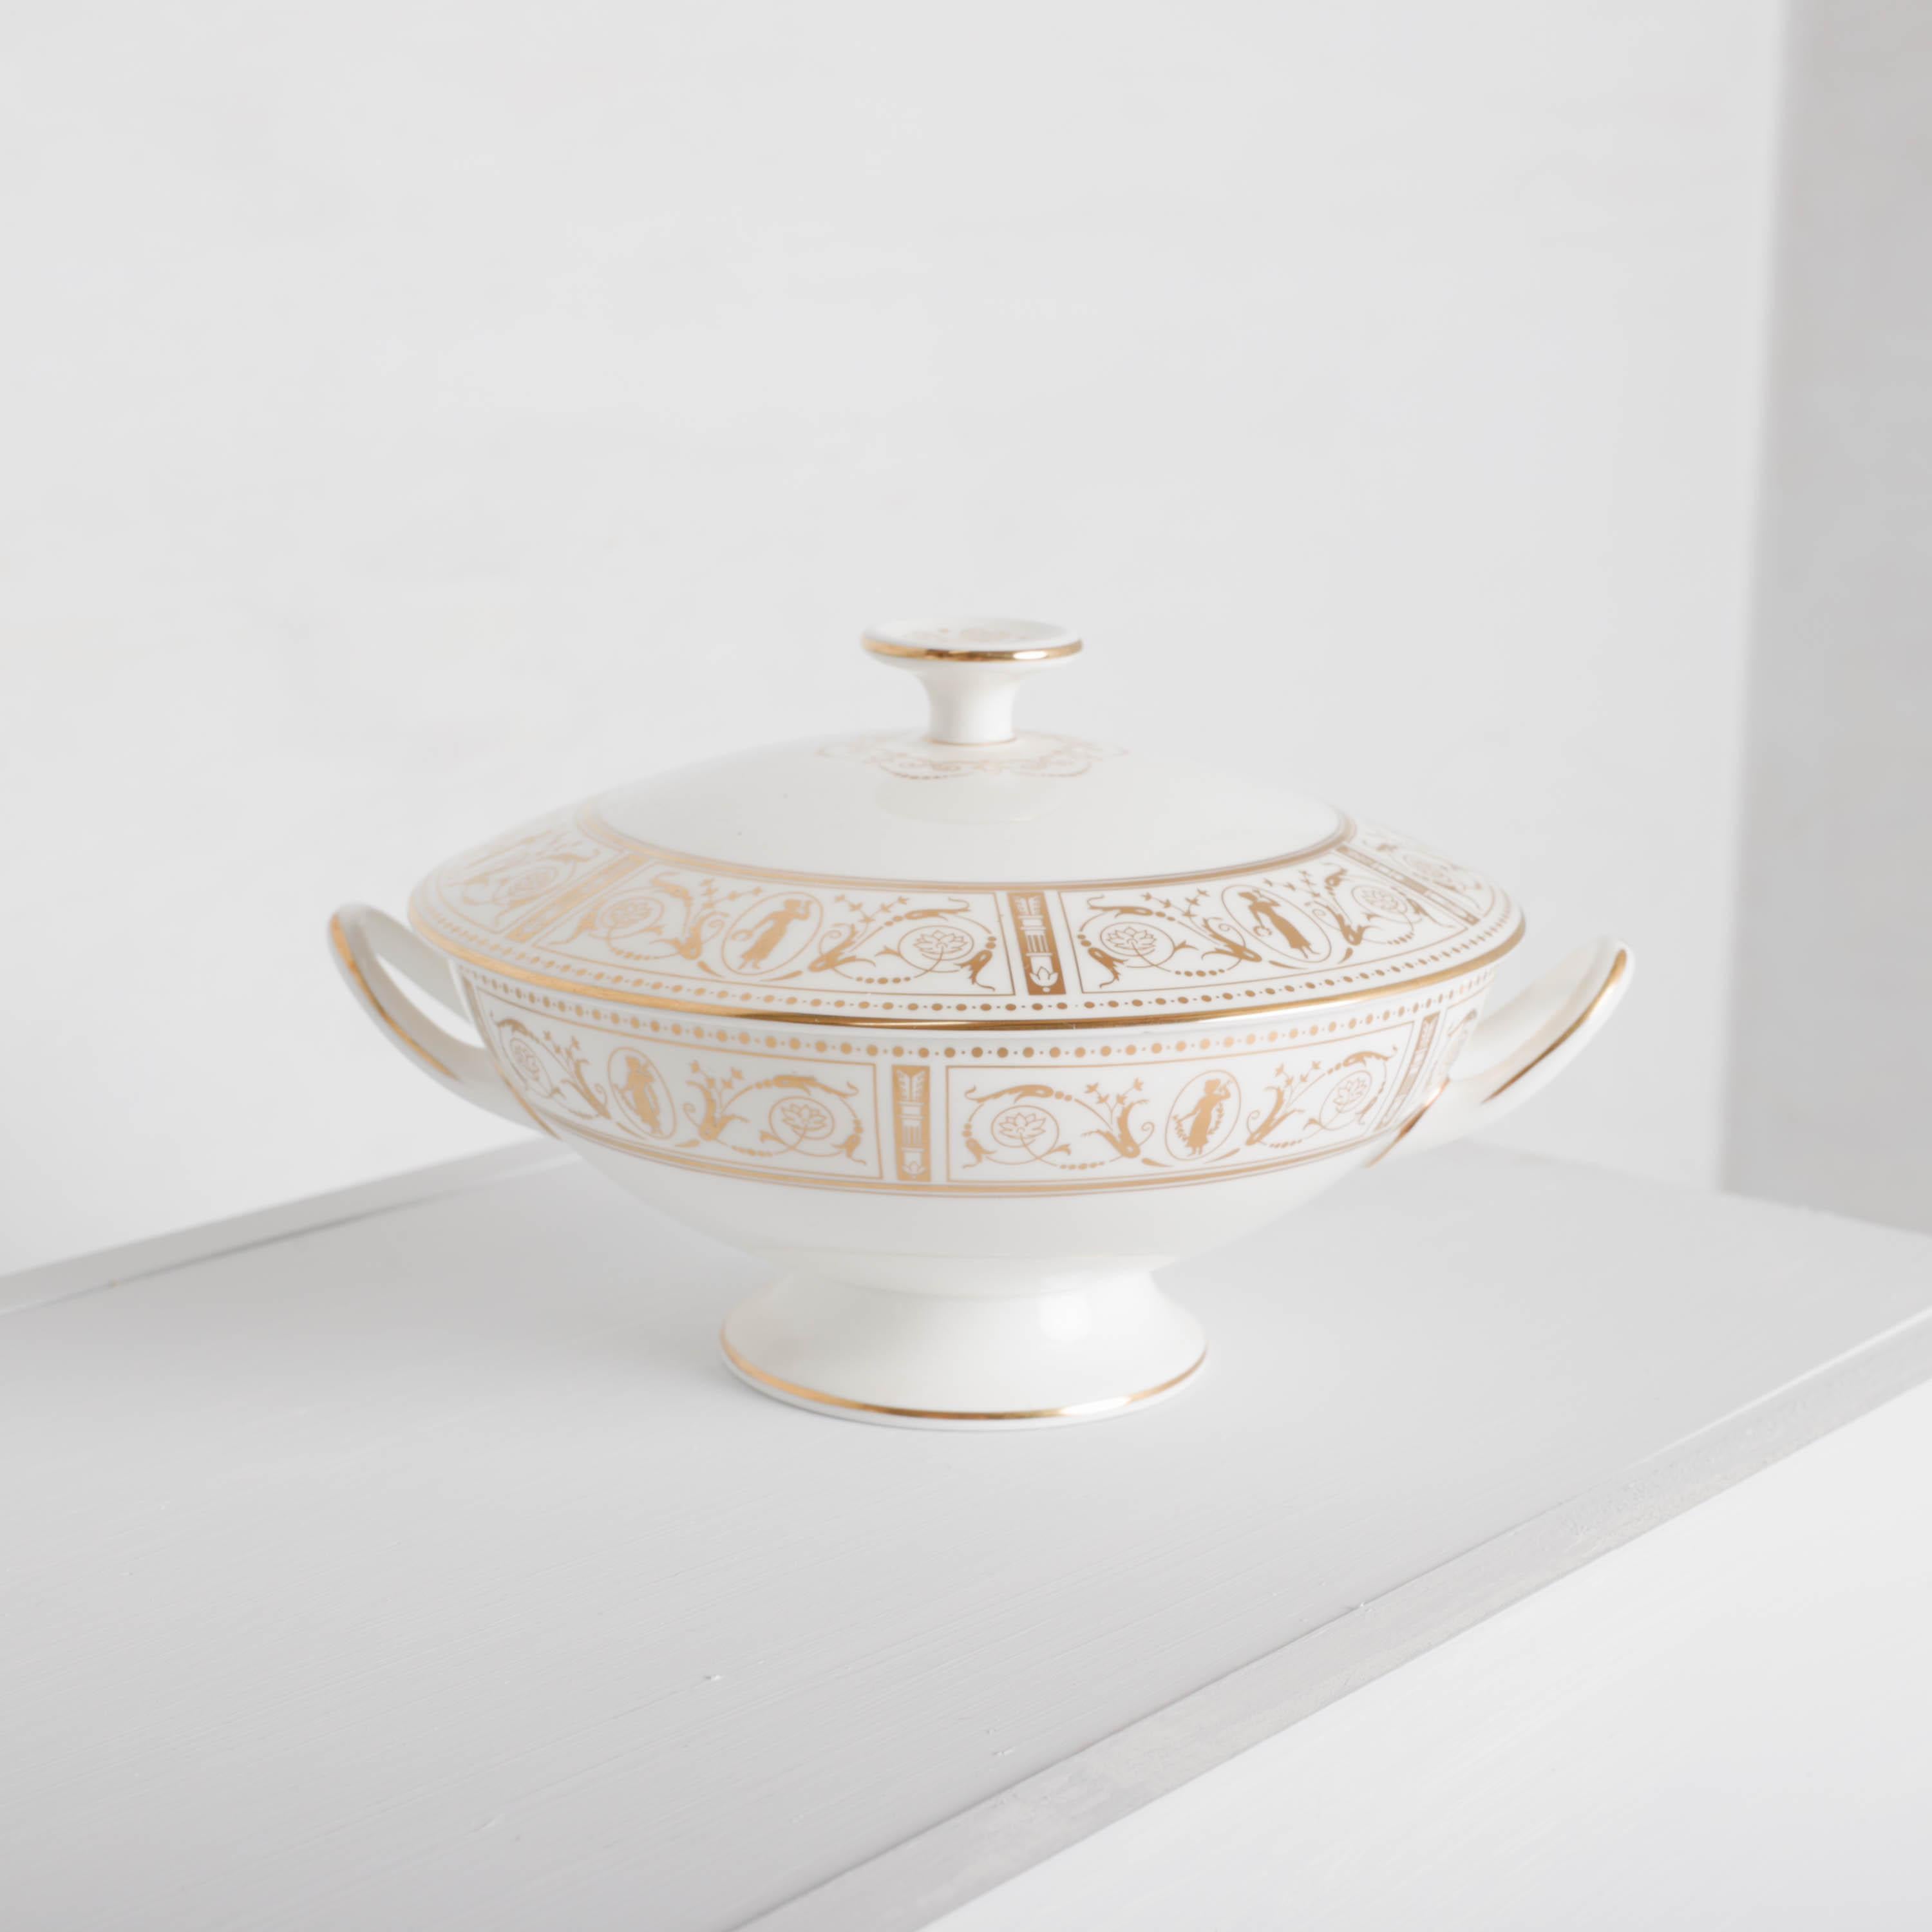 China Service for 12 Wedgewood Gold Grecian Circa 1964 For Sale 3